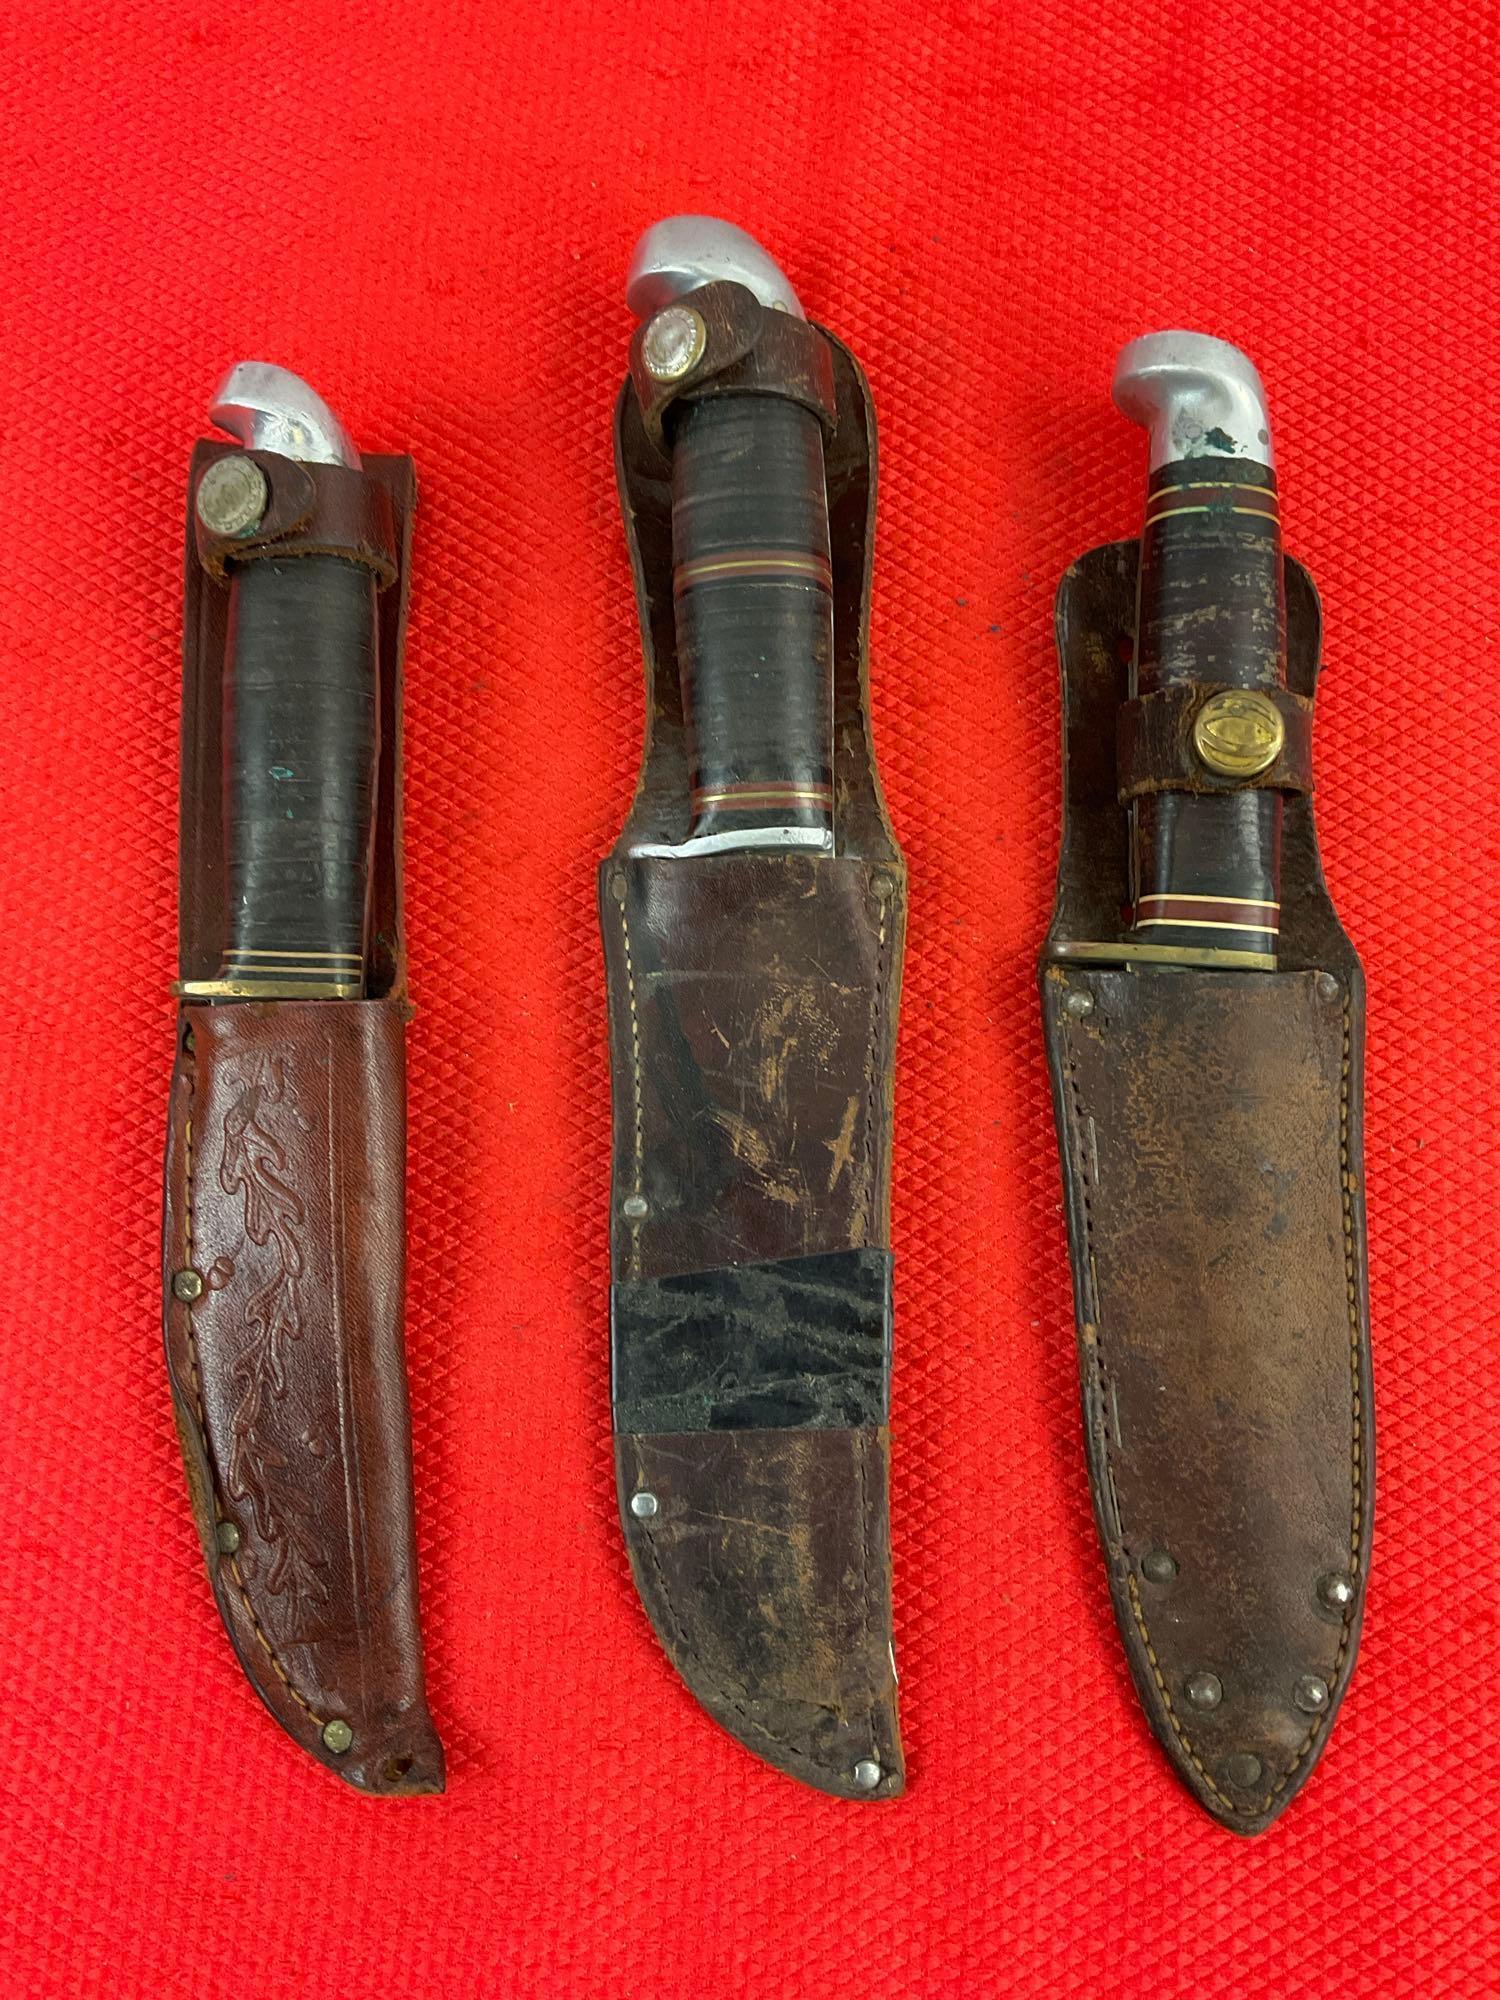 3 pcs Vintage Steel Fixed Blade Hunting Knives w/ Sheathes. 2x Western, 1x West-Cut. See pics.